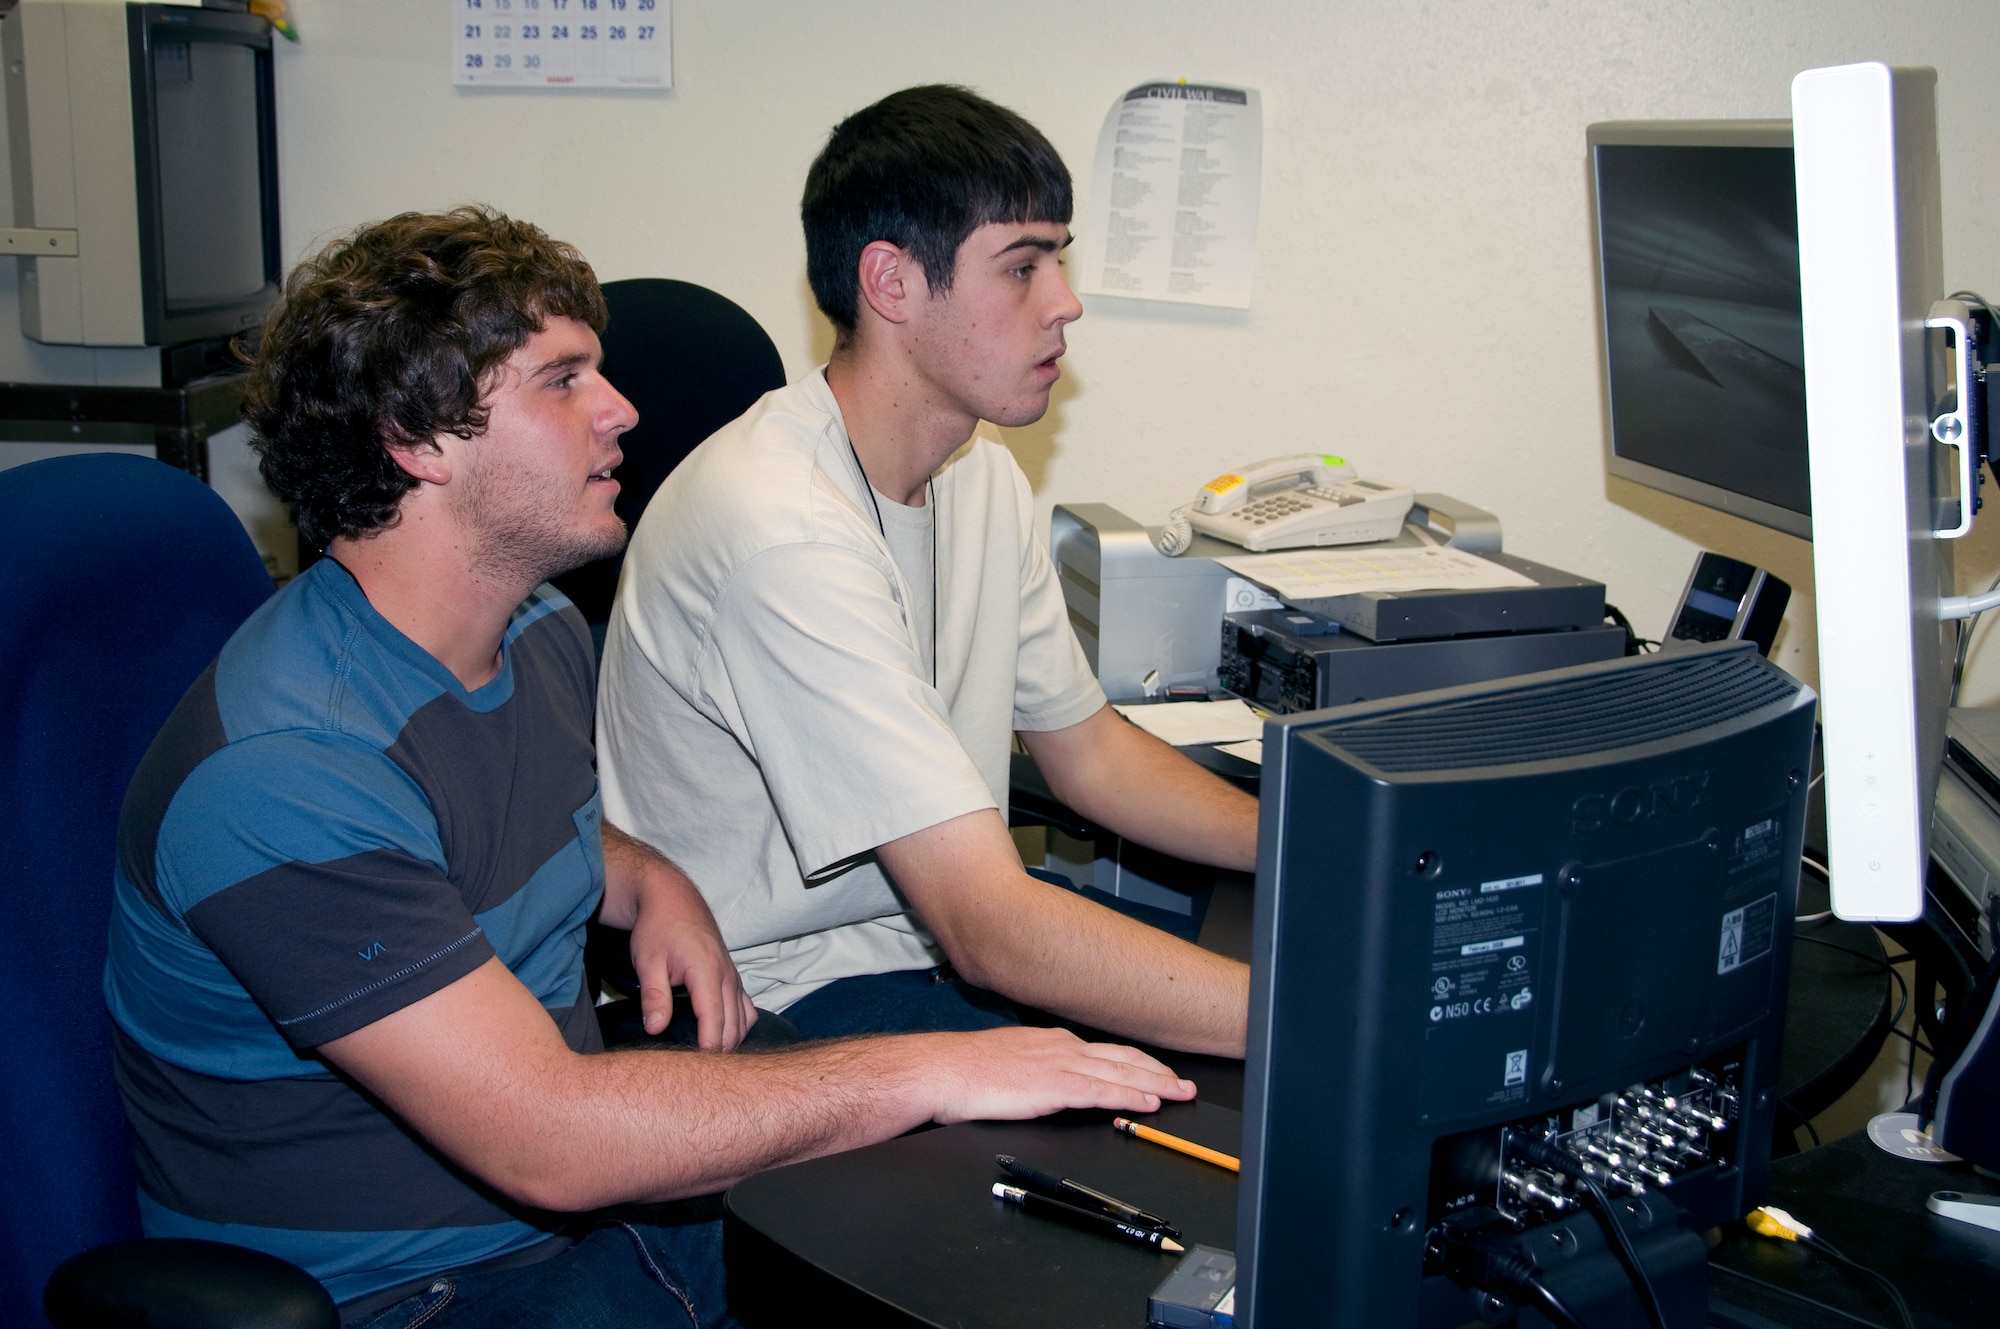 Calum Murray, left, and Ethan Halliday work on editing film footage as part of their duties with the Air Force Operational Test and Evaluation Center Student Intern Program. AFOTEC is partnering with the University of New Mexico for the program aimed at recruiting and training candidates for potential future employment opportunities within AFOTEC, the Air Force, or other government service.